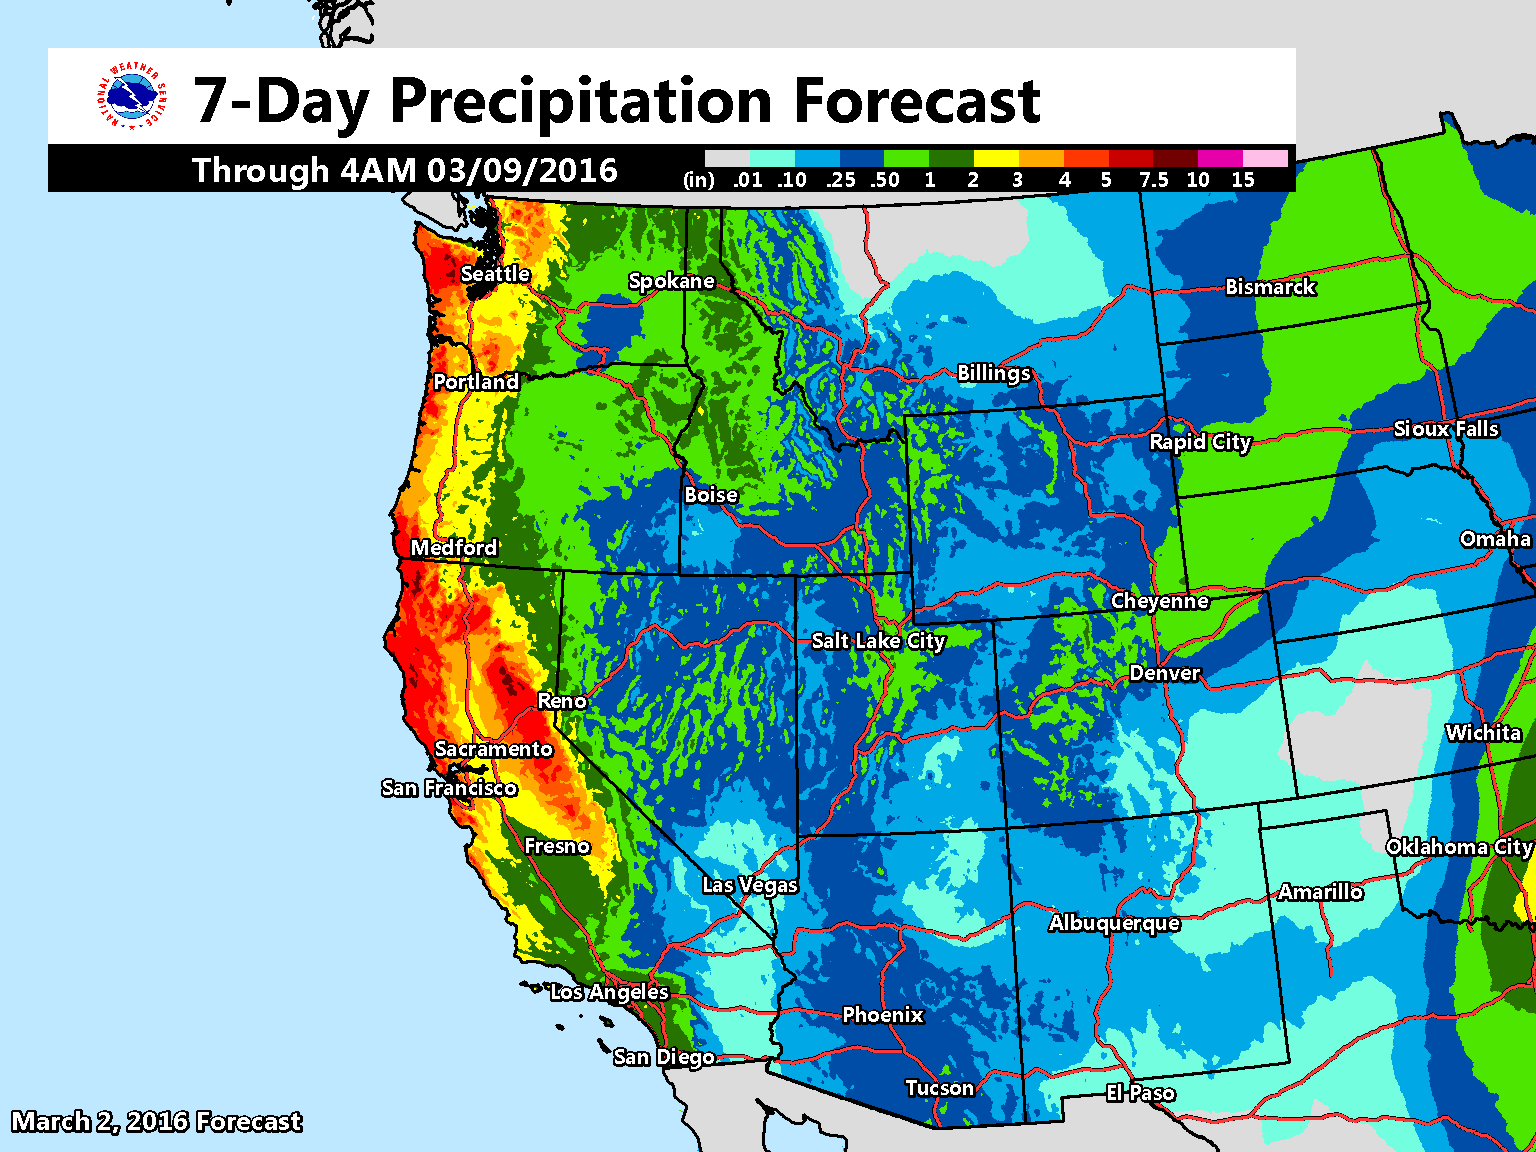 "More active weather pattern still on track for much of the western U.S. over the next week. Here is a look at the latest 7 day precipitation forecast." - NOAA, today